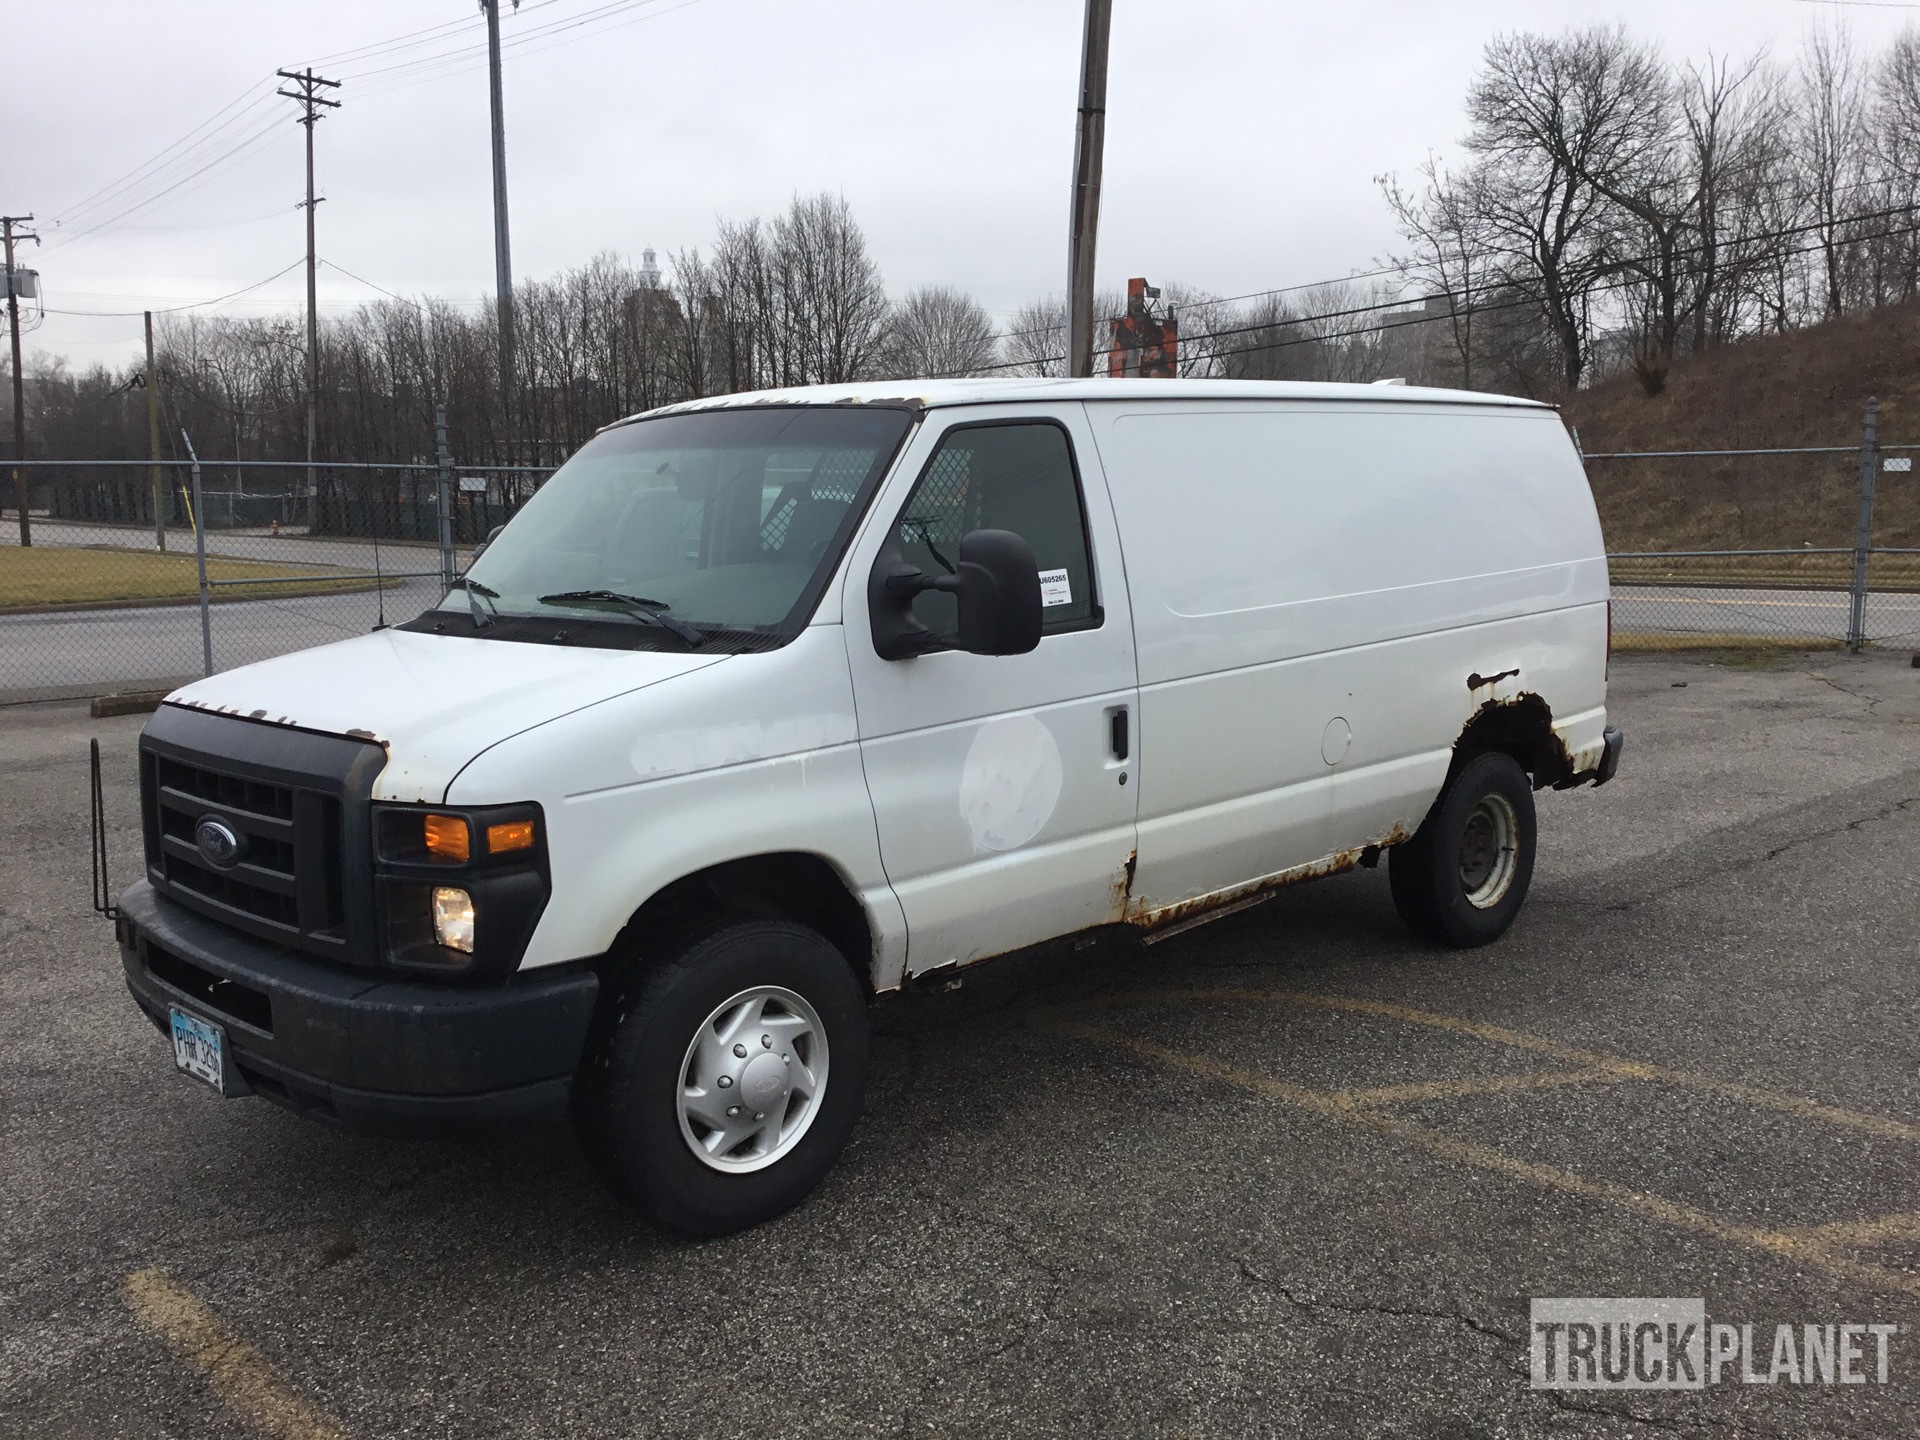 2008 Ford E250 4x2 Cargo Van in Youngstown, Ohio, United States  (TruckPlanet Item #8715560)